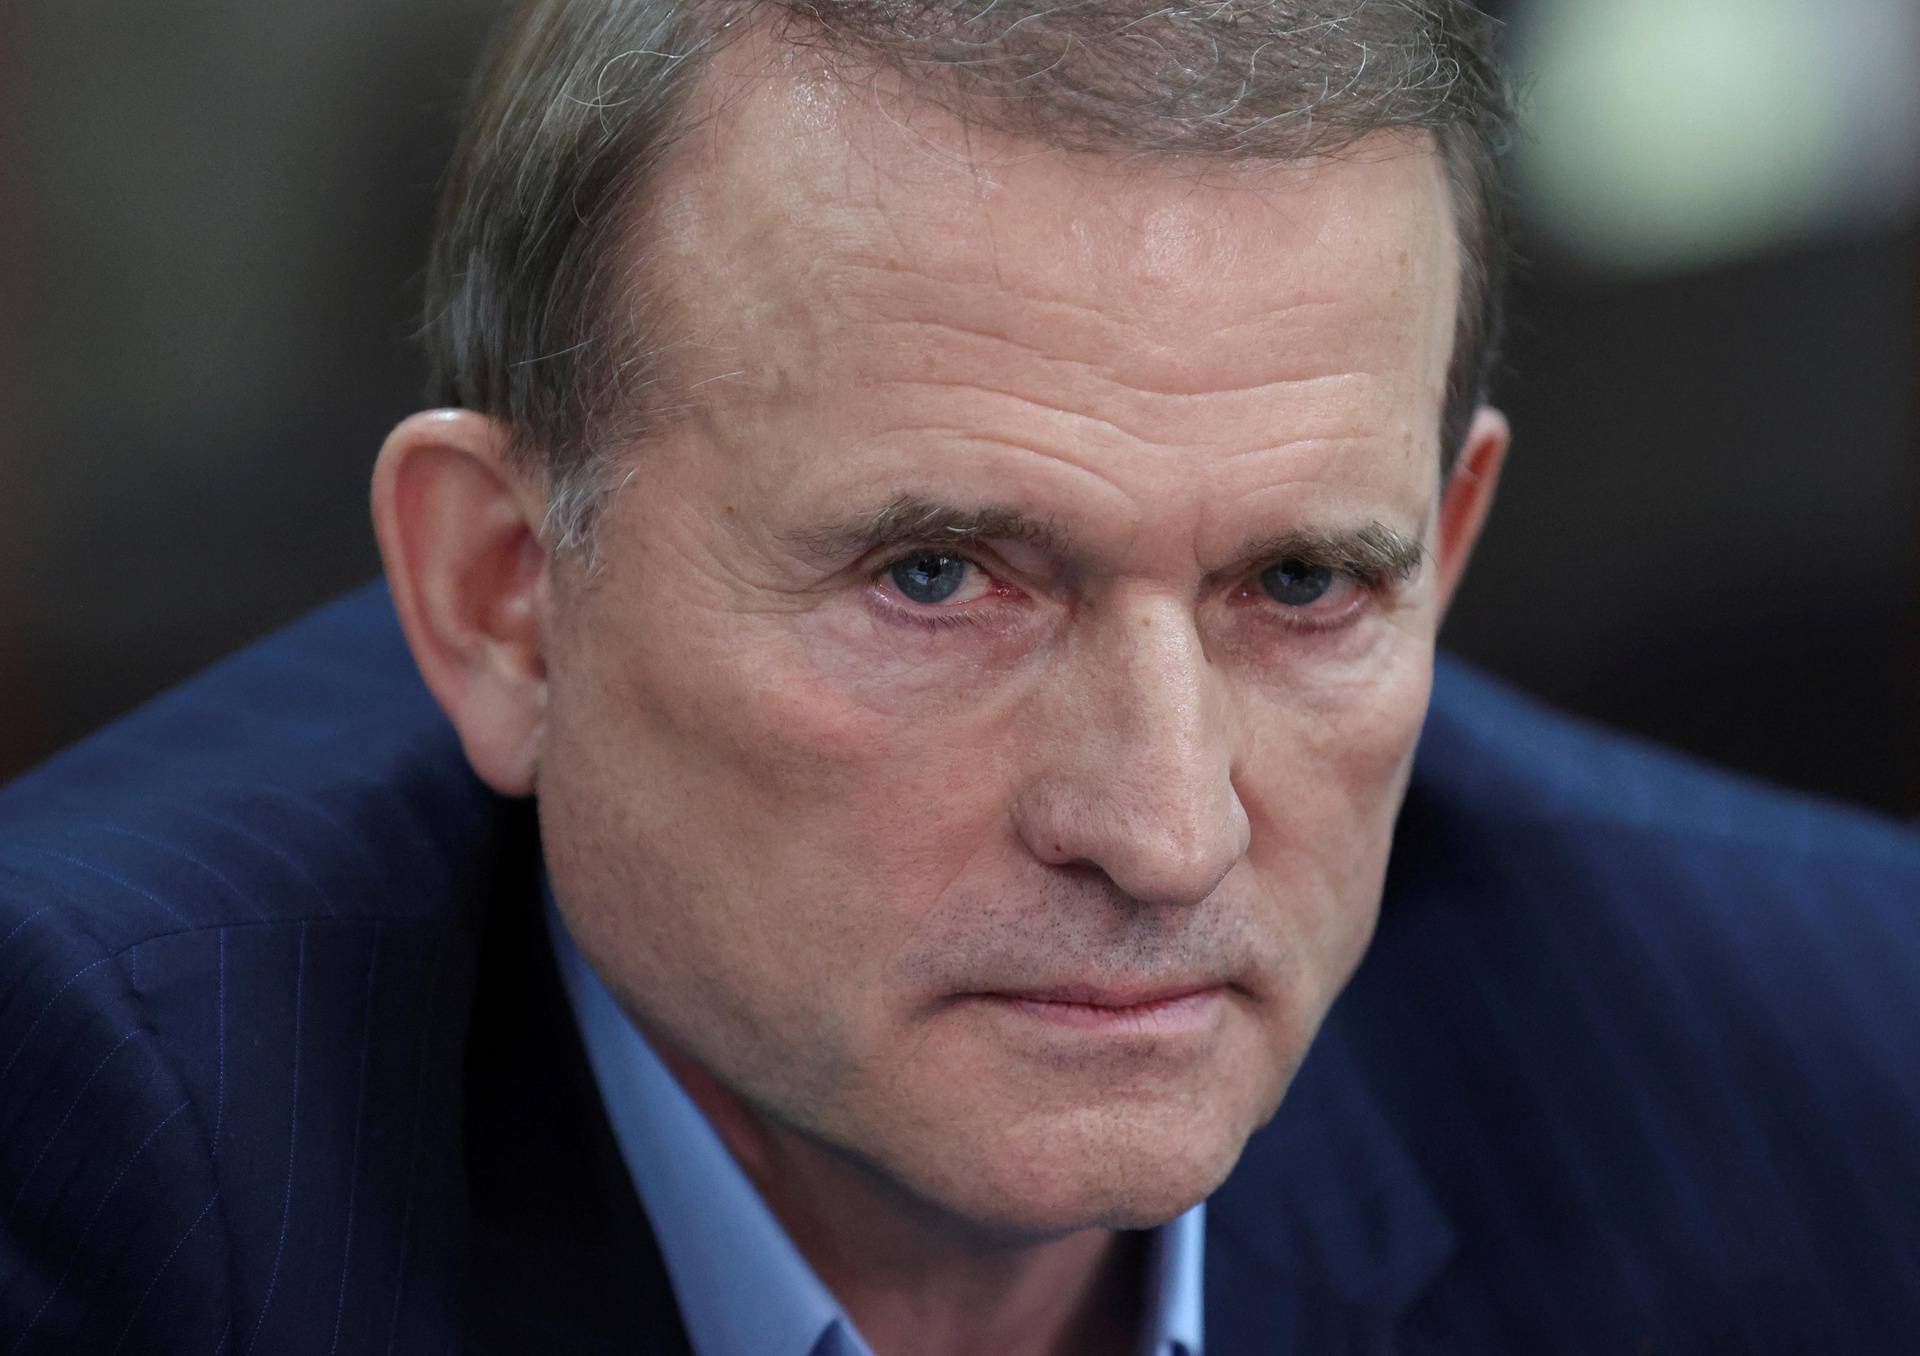 FILE PHOTO: Viktor Medvedchuk, leader of Opposition Platform - For Life political party, attends a court hearing in Kyiv